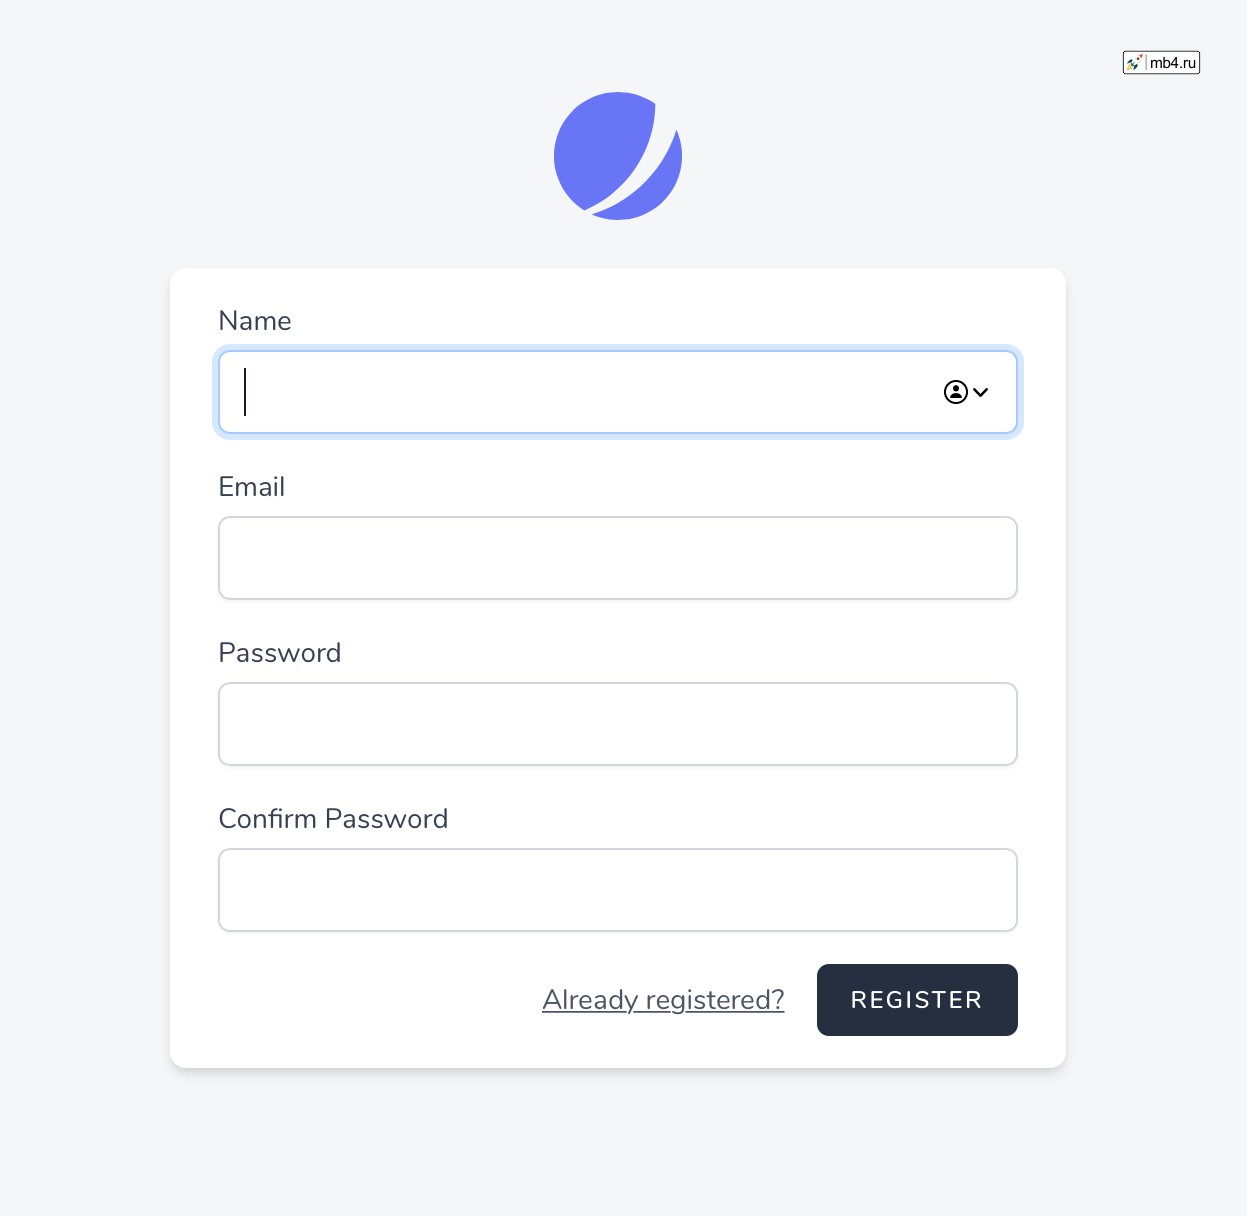 Laravel Jetstream automatically scaffolds the login, two-factor login, registration, password reset, and email verification views for your project.